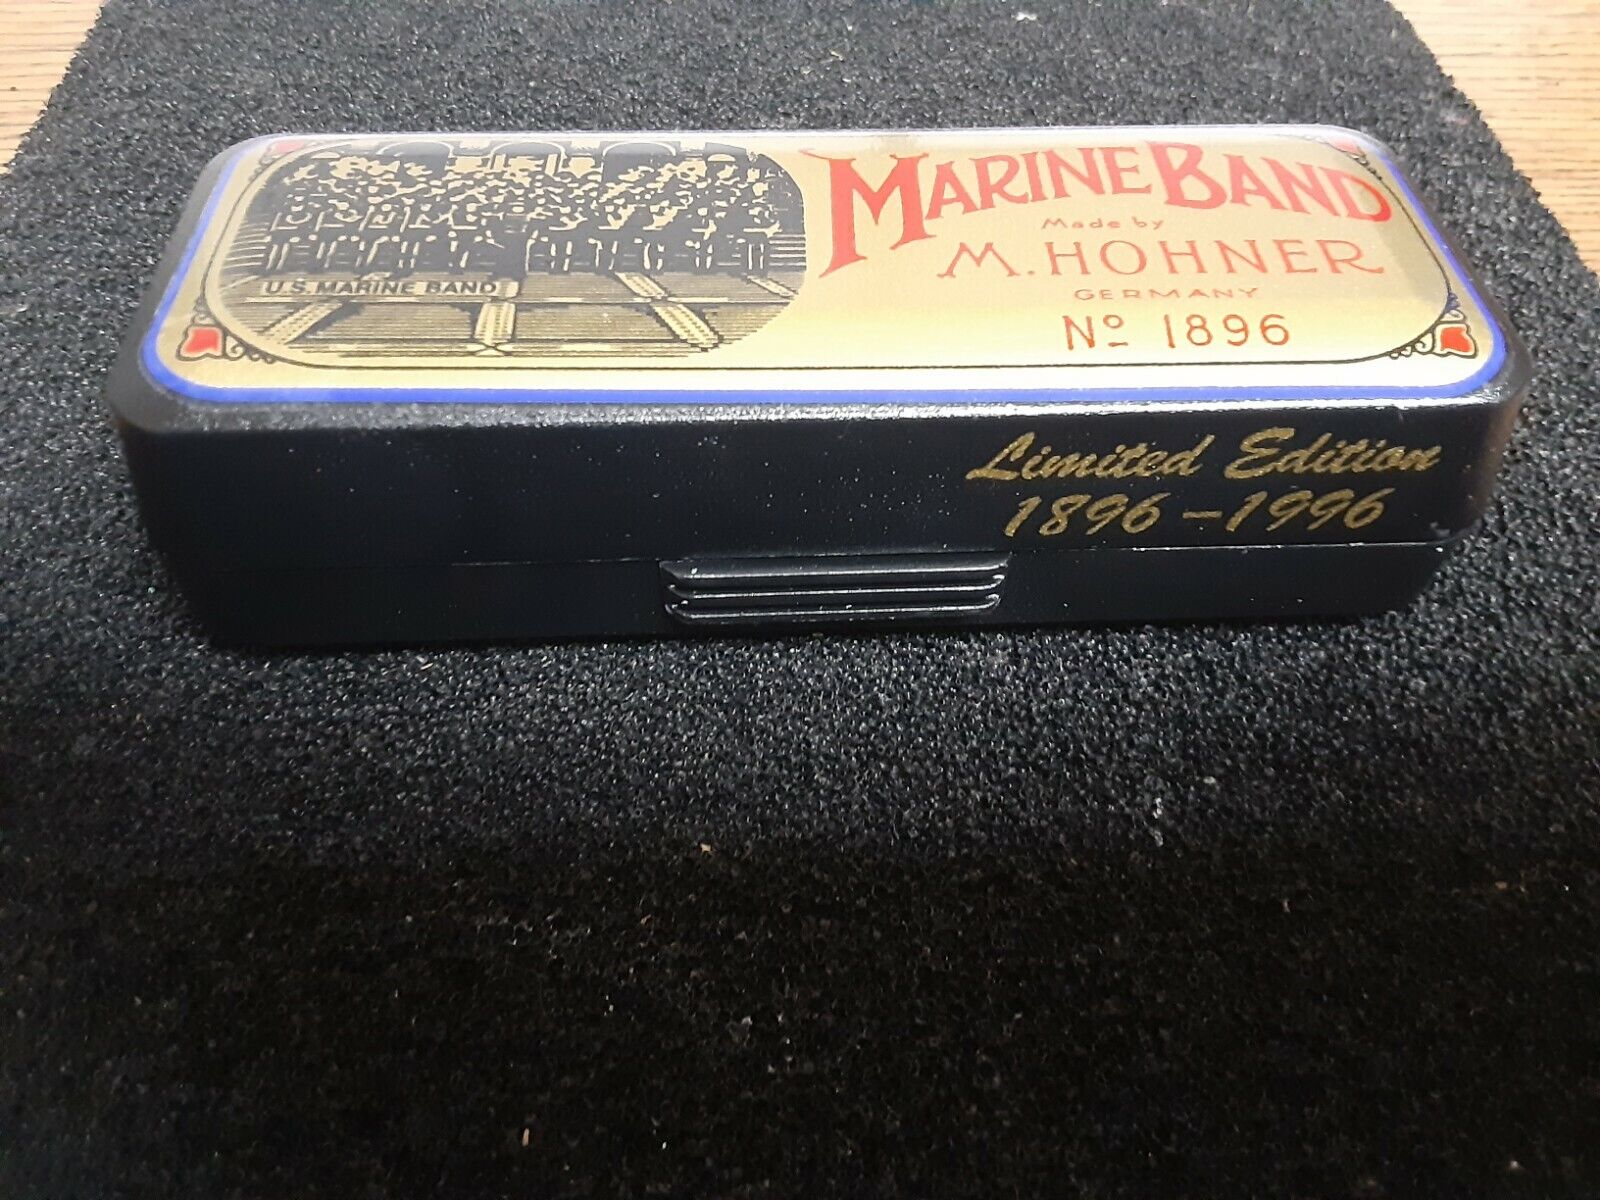 Rarely New Harmonica Marine Band 1896 - 1996 LIMITED EDITION Gold Plated Germany